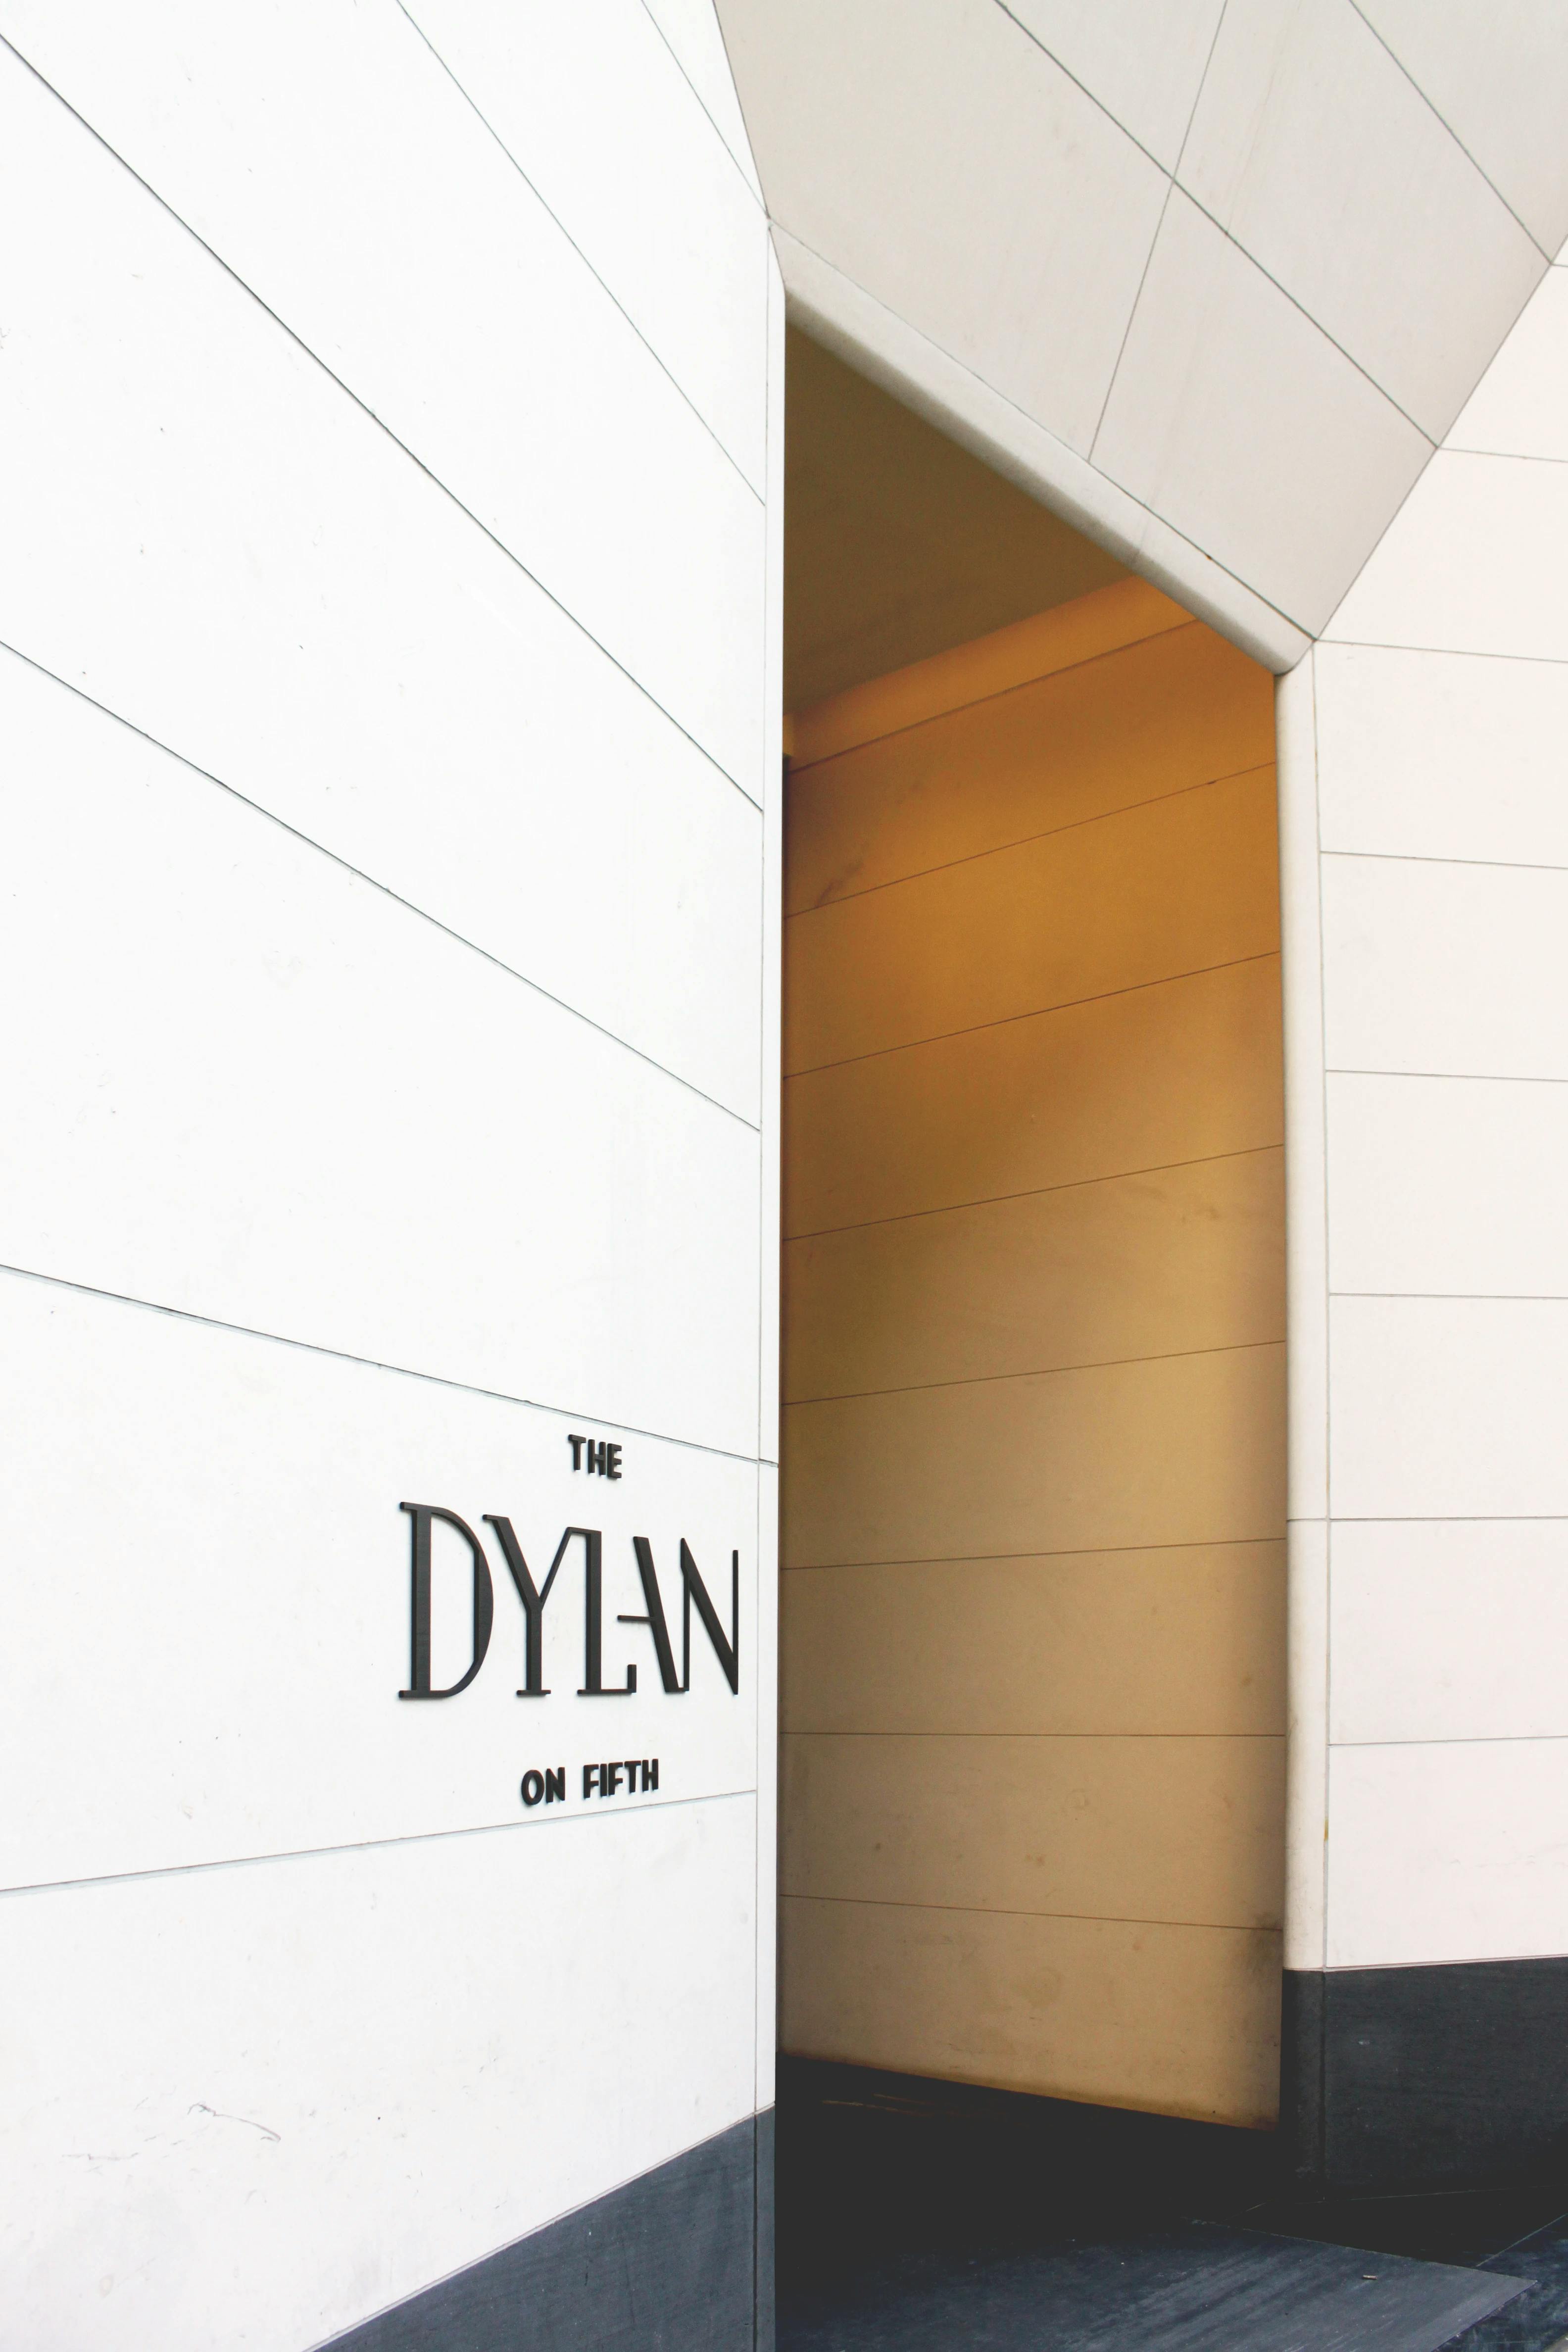 Text on a white wall that says "The Dylan on Fifth" in the lobby of a residential building.